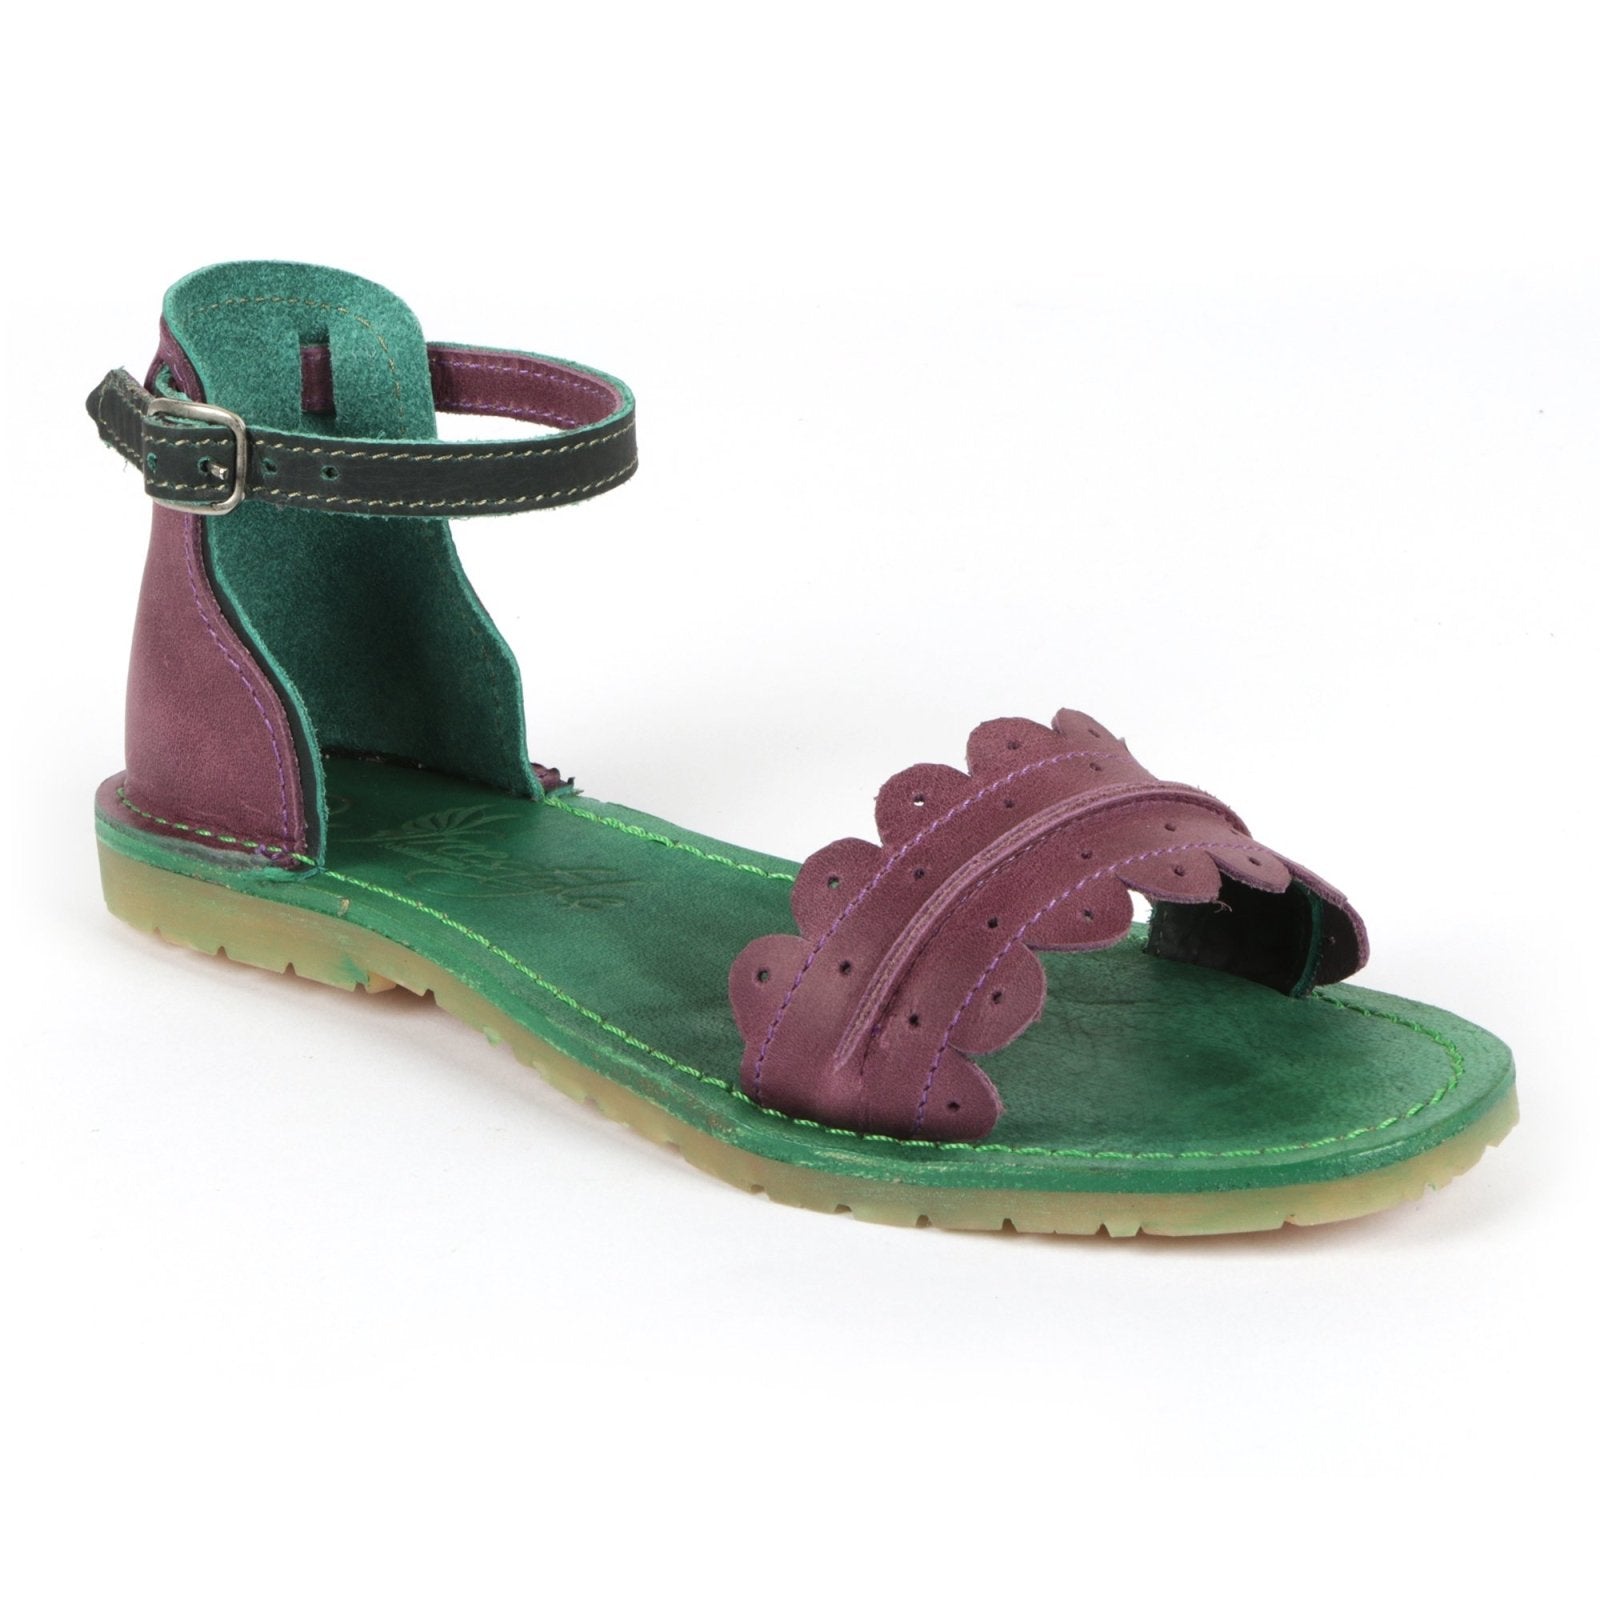 Jamie Bohemian Chic Hand-dyed summer sandal - Freestyle SA Proudly local leather boots veldskoens vellies leather shoes suede veldskoens